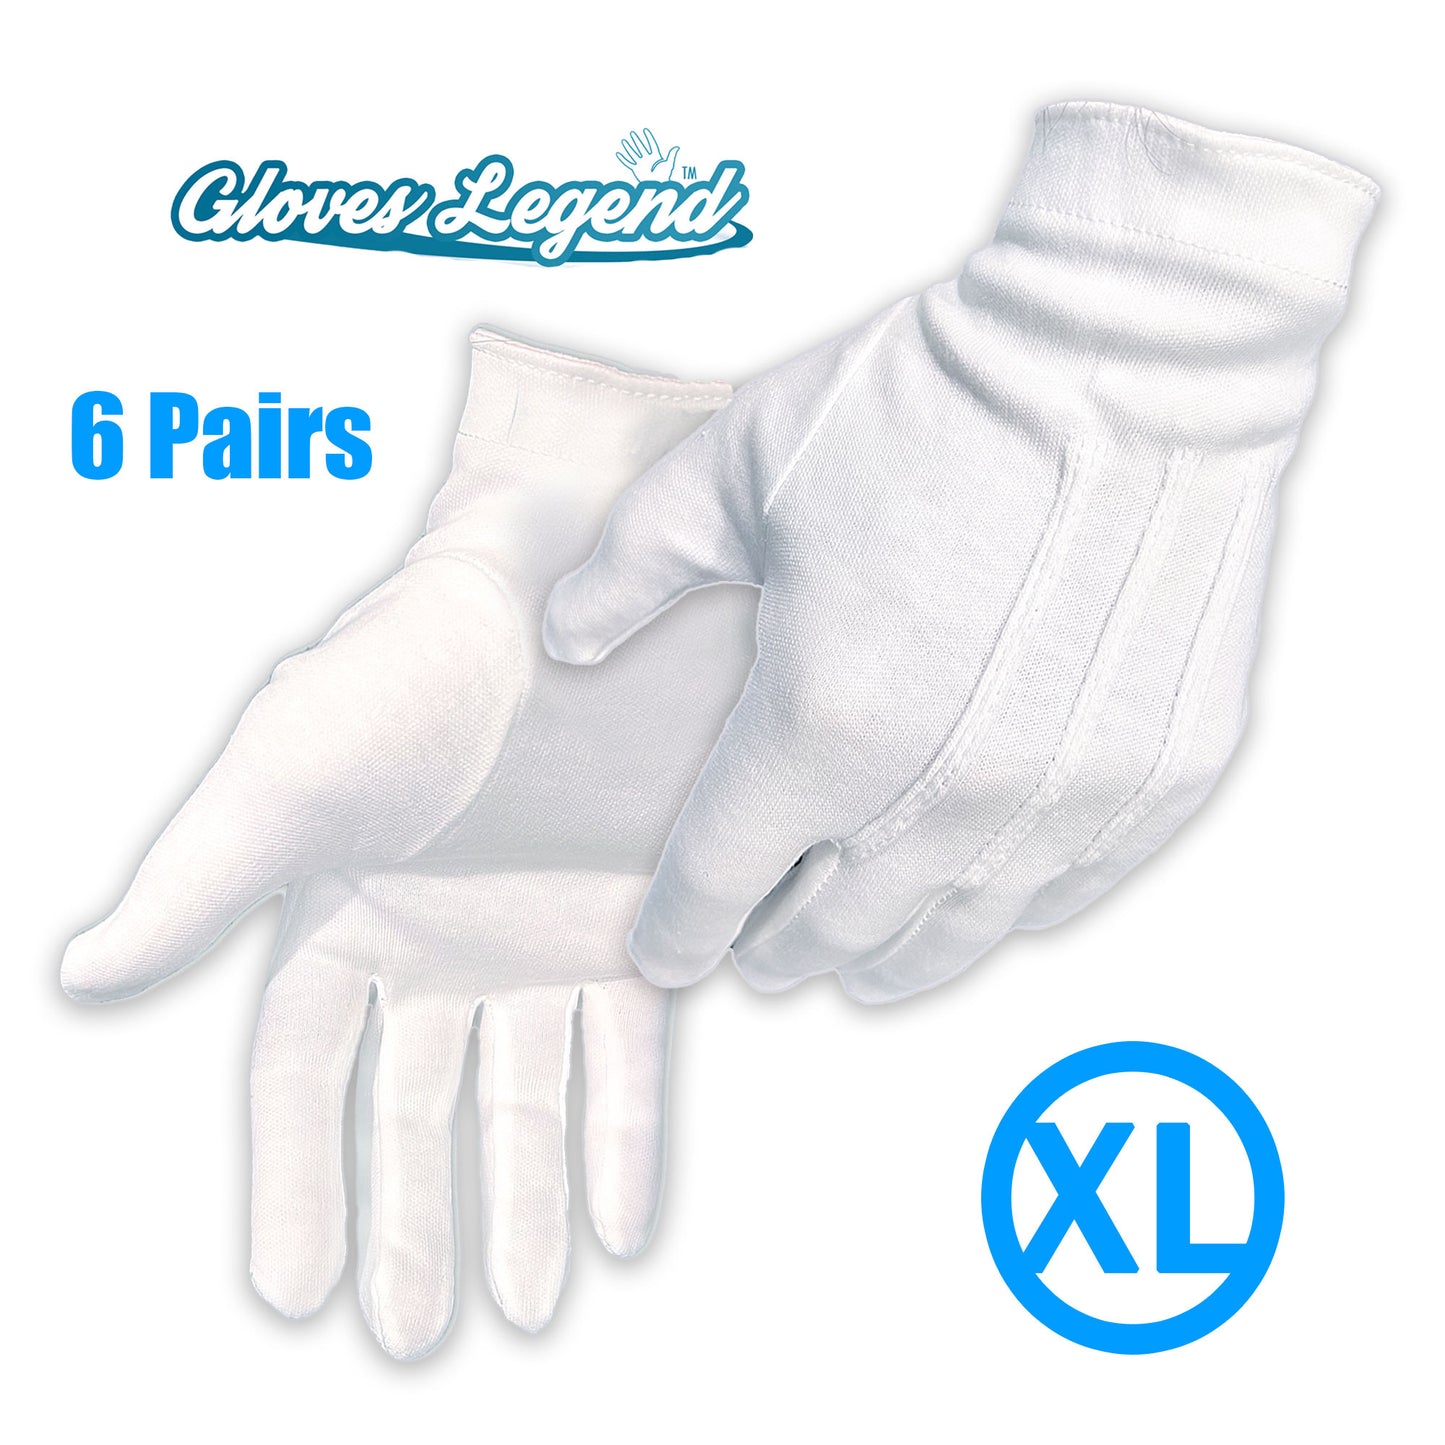 Extra-Large - 6 Pairs (12 Gloves) Gloves Legend 100% White Cotton Marching Parade Formal Dress Gloves